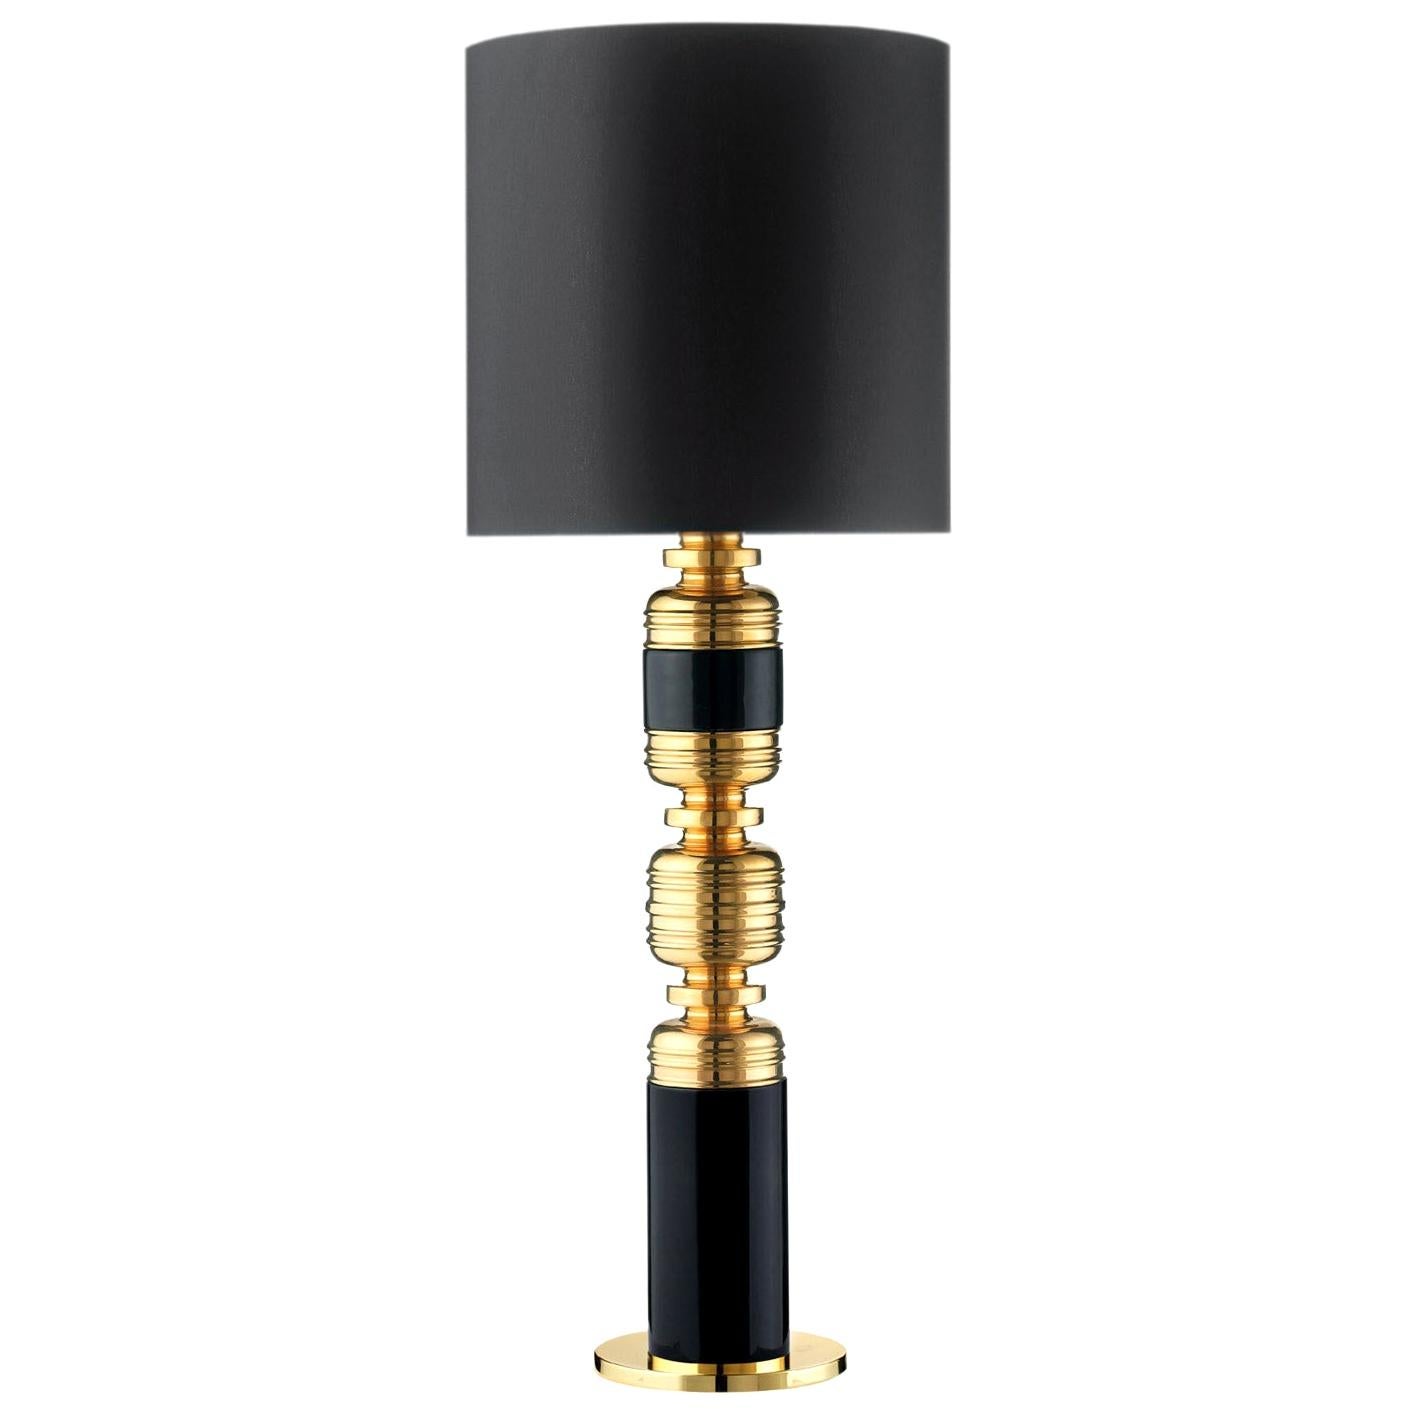 Ceramic Lamp "THEA 4" Handcrafted in 24-Karat Gold and Black by Gabriella B. For Sale